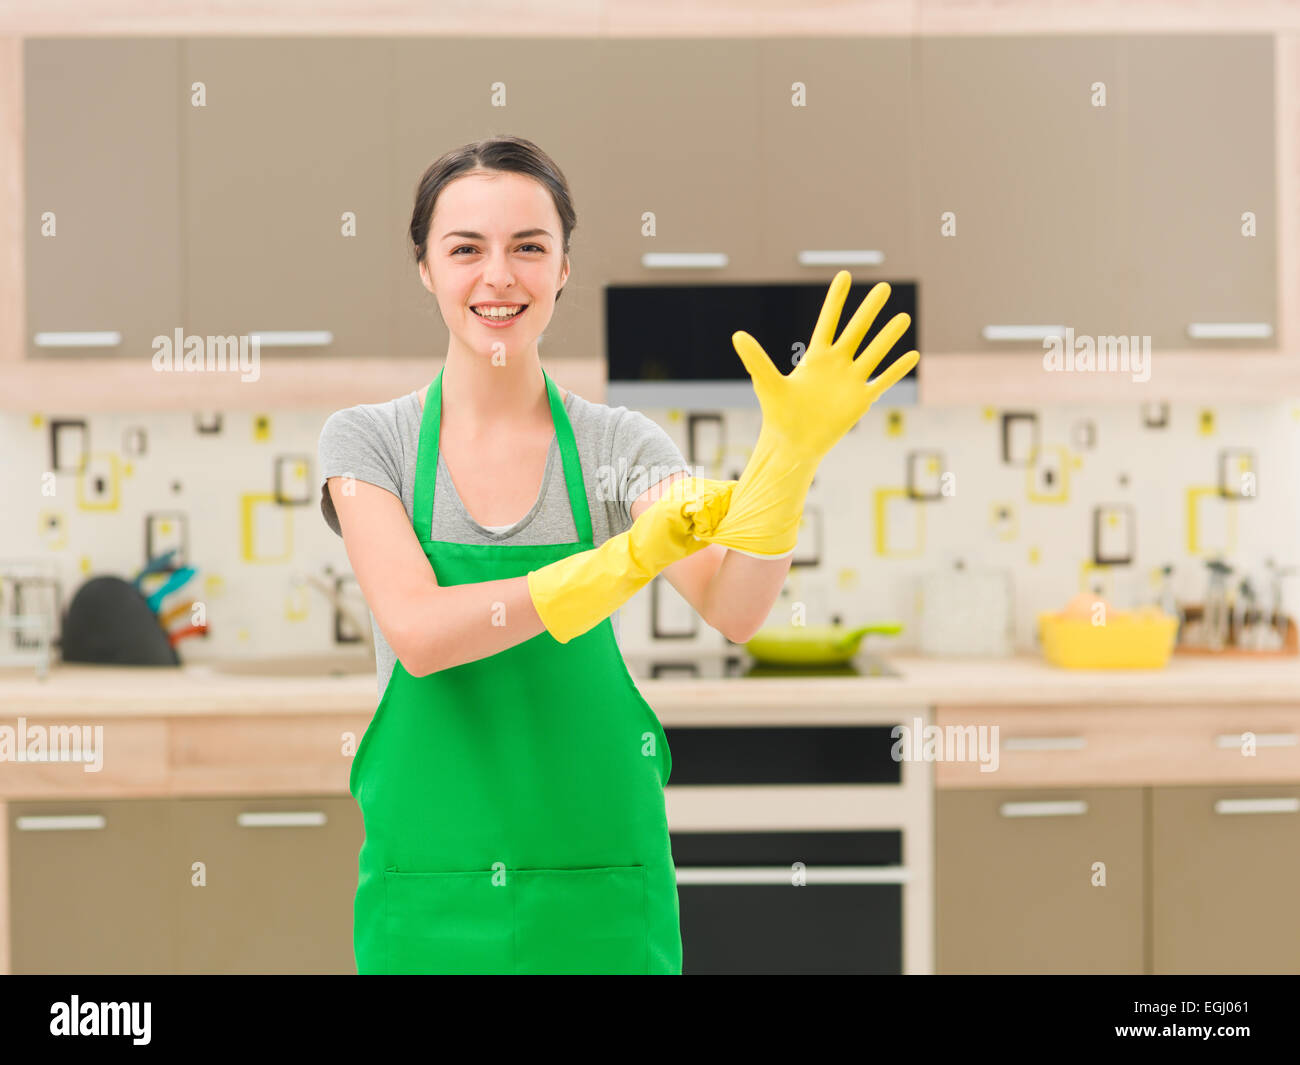 young happy woman putting rubber gloves and getting ready for cleaning Stock Photo